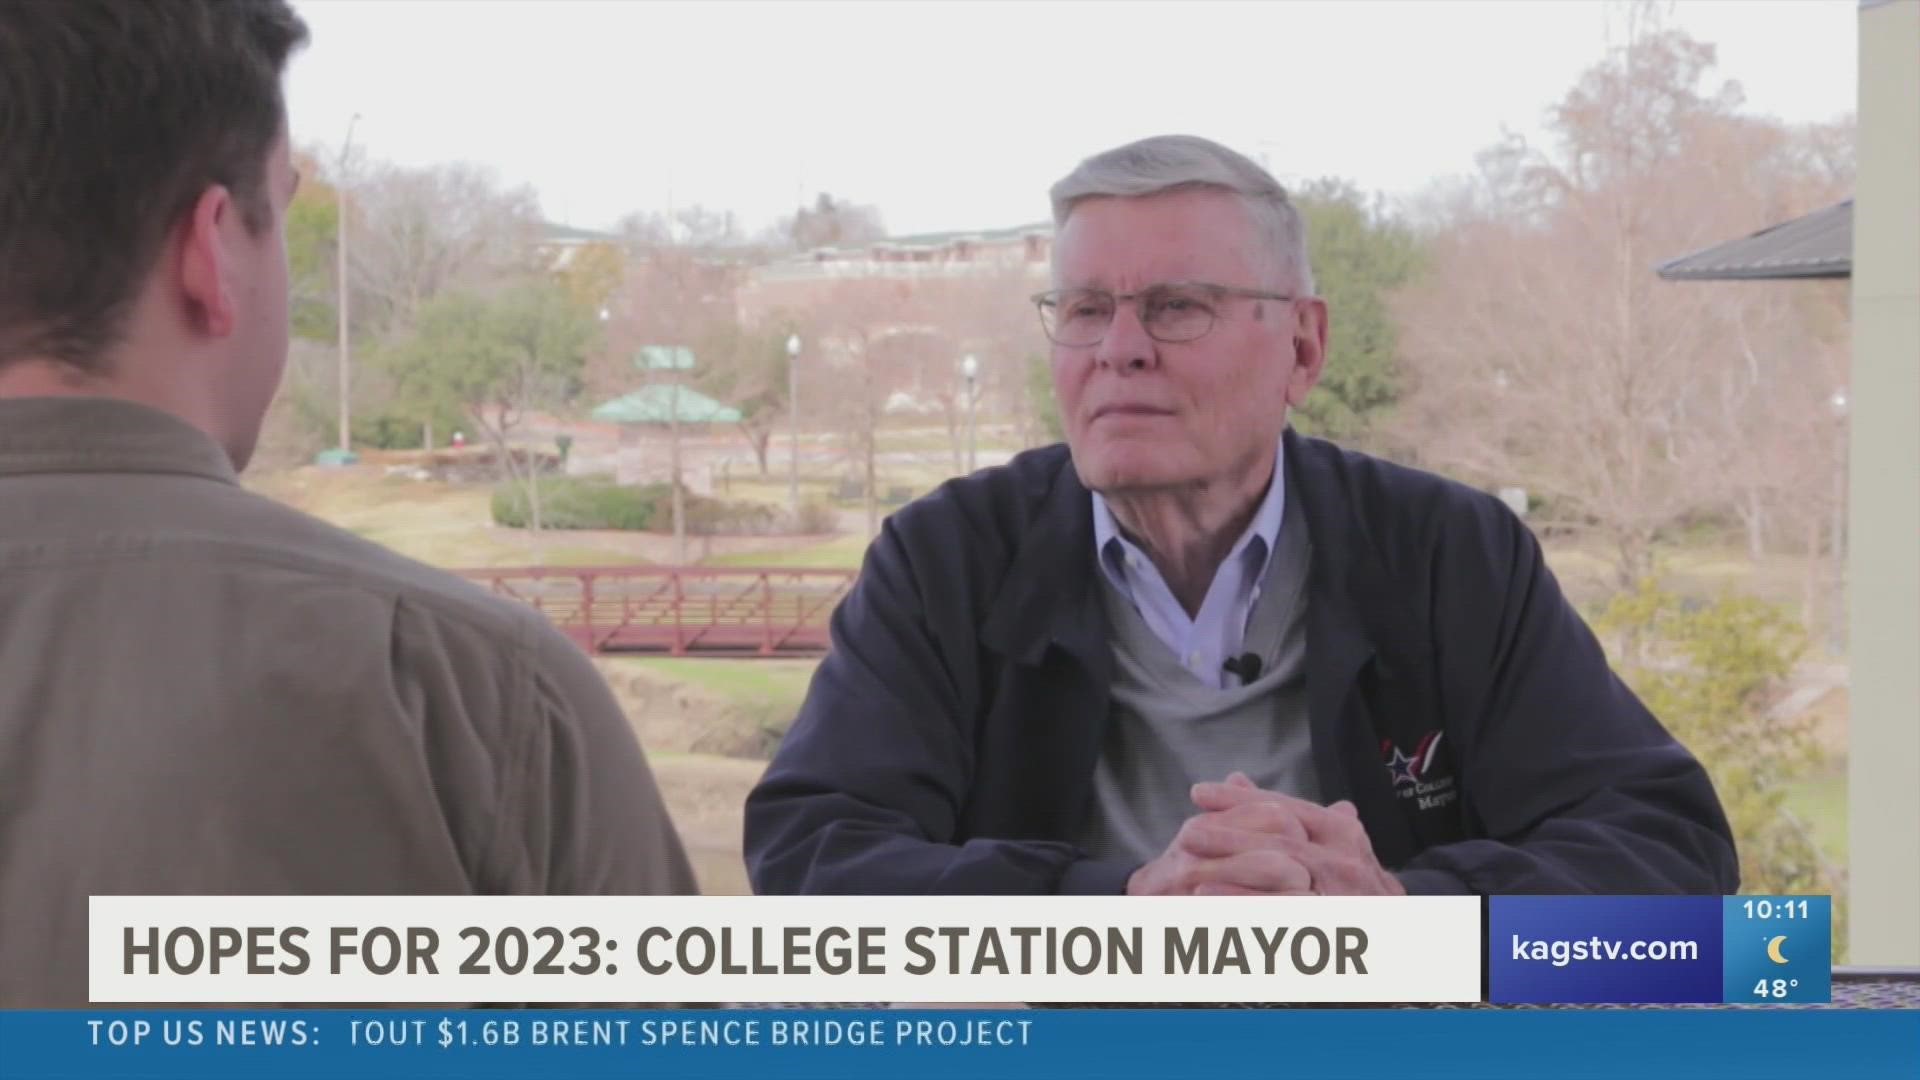 College Station Mayor, John Nichols, sat down with KAGS to discuss his plans for following-up on propositions, taxes, and public safety for the city in 2023.